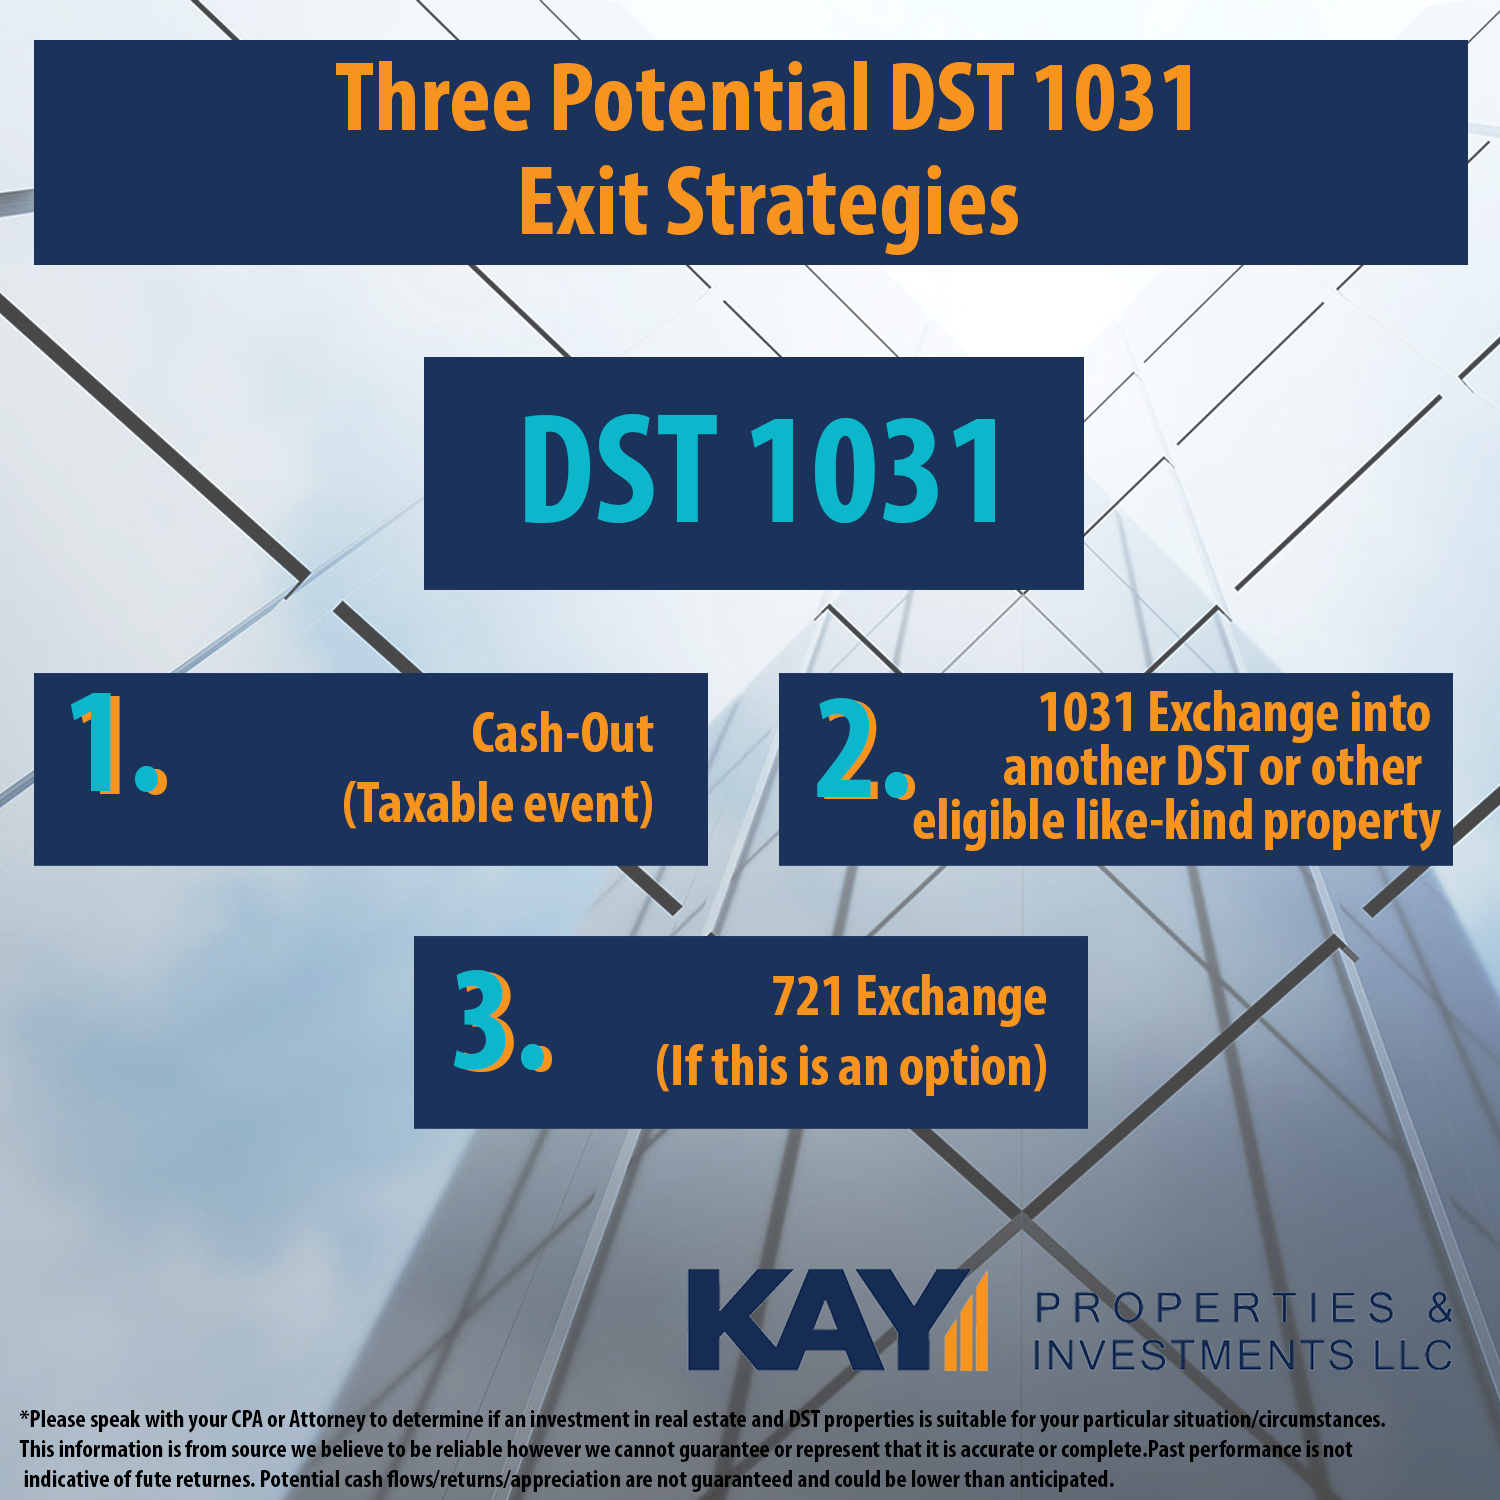 Consider These Potential DST 1031 Exit Strategy Options: Cash Out, 1031 Exchange or 721 Exchange